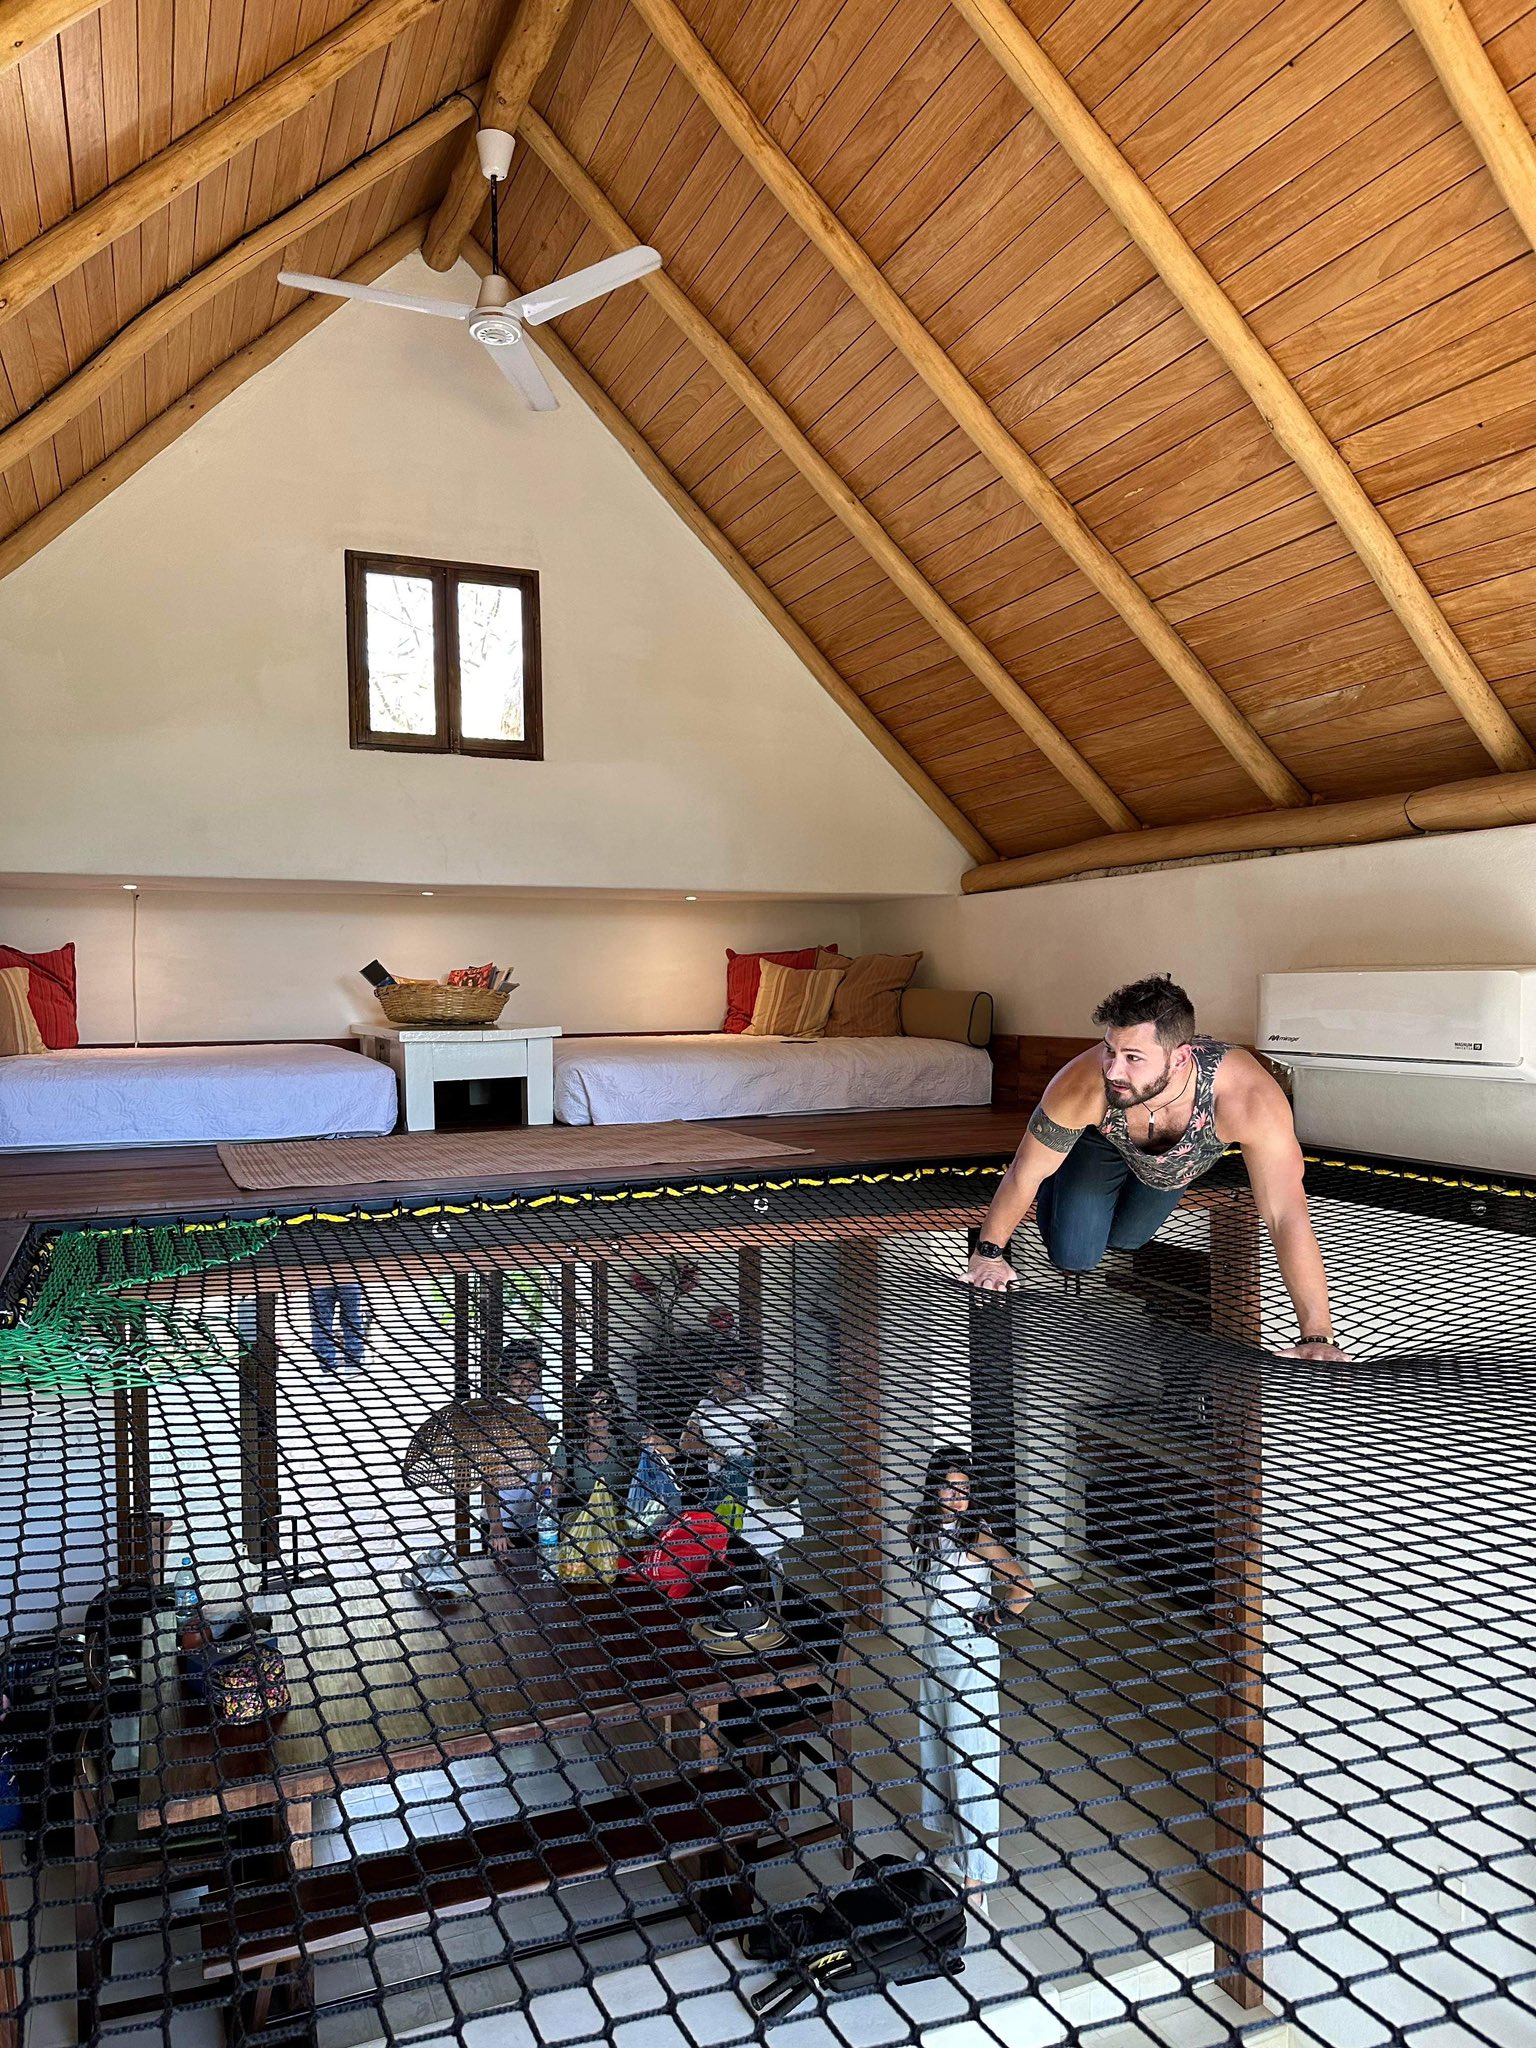 Davey Nabes on X: Our airbnb has a little loft to sleep in and giant net  hammock  / X